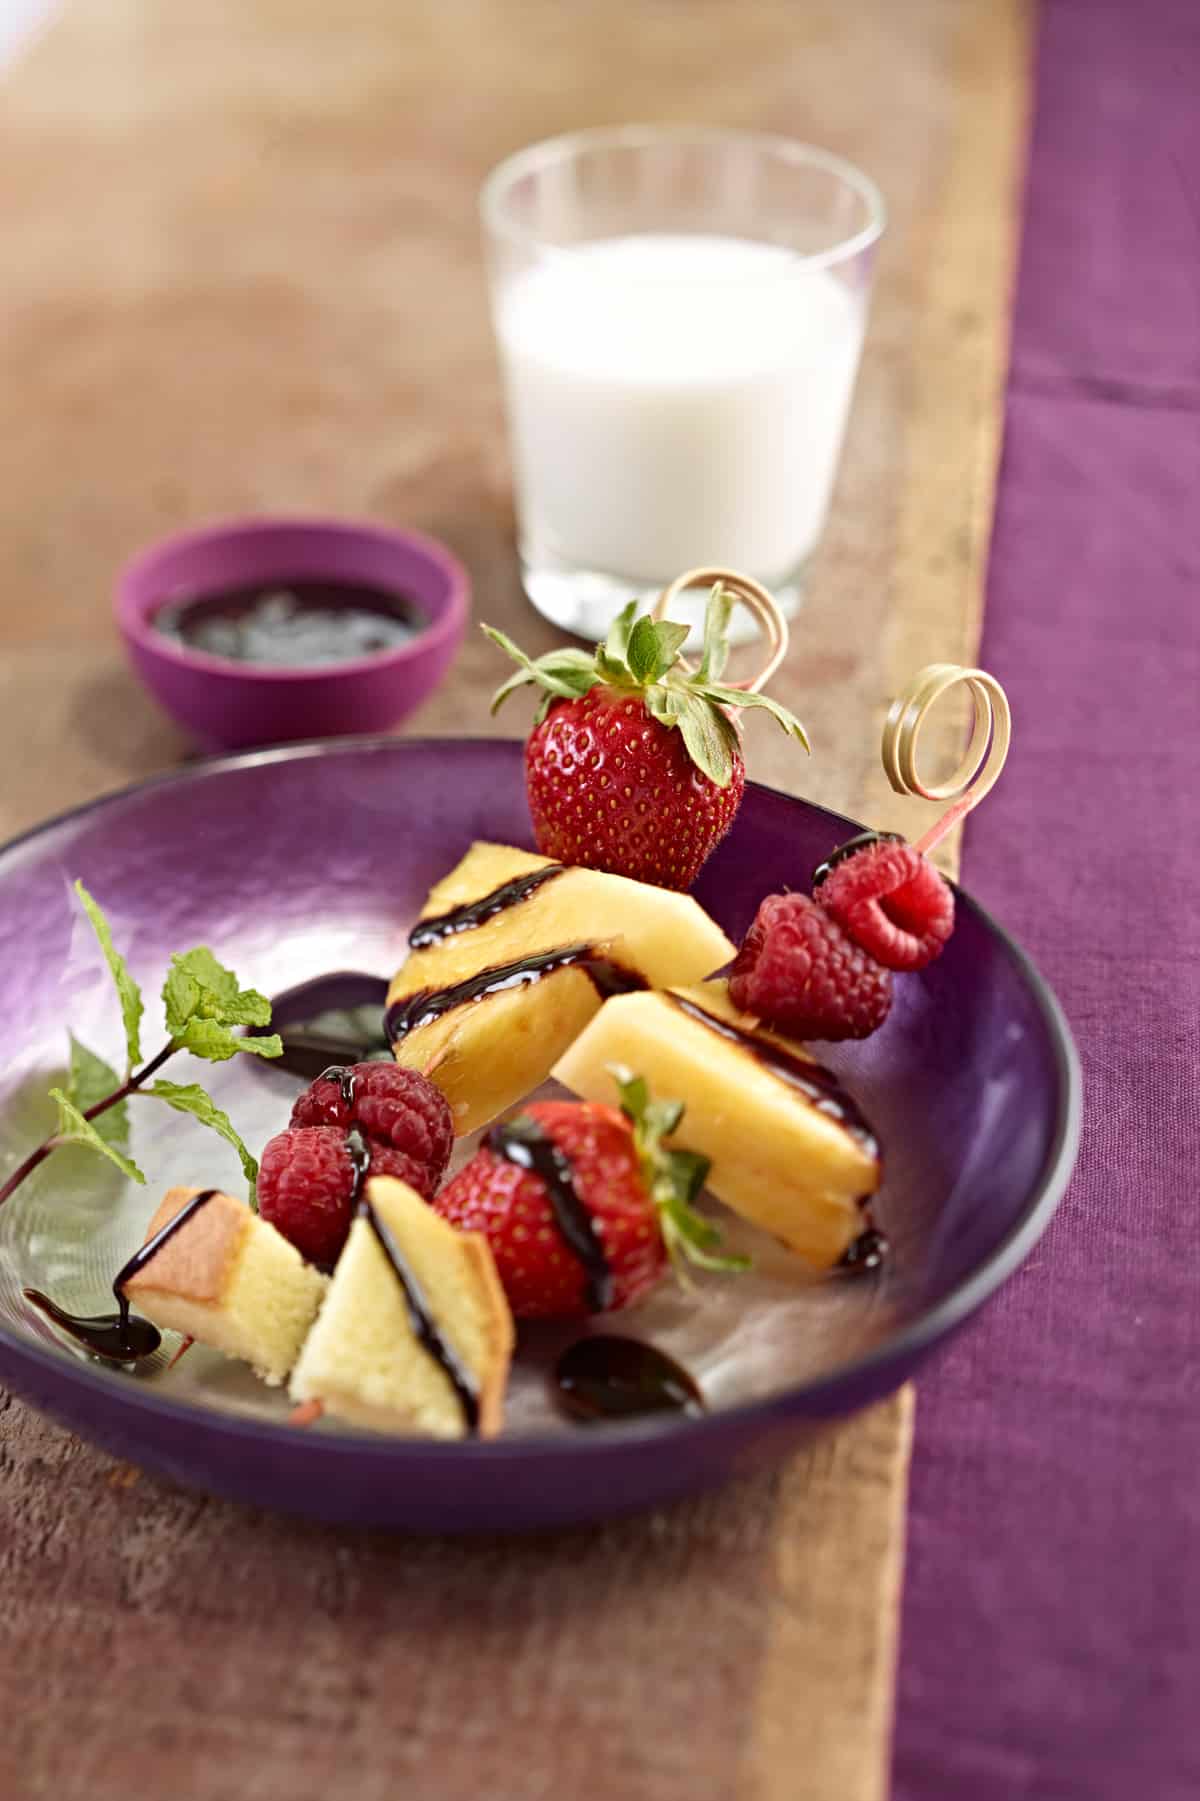 Fruit skewers with chocolate syrup 